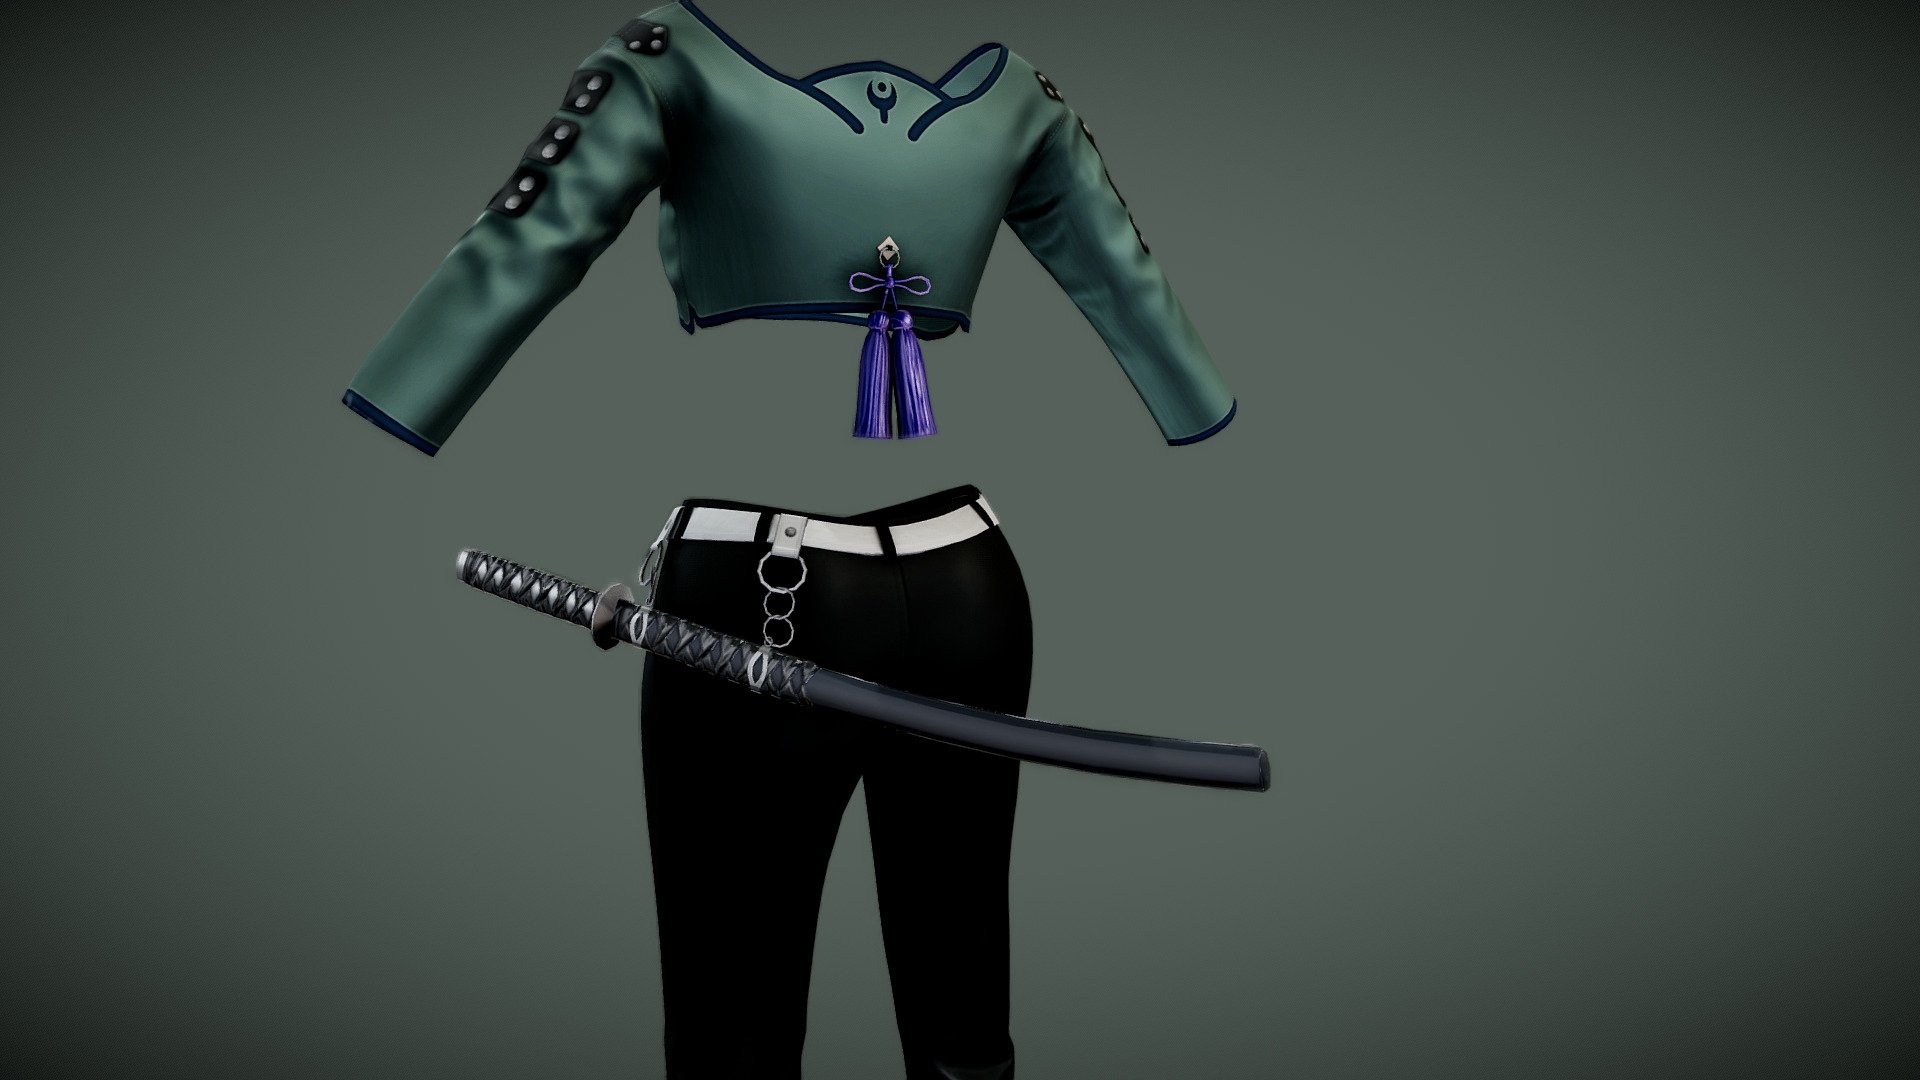 Outfit + Sword

Can fit to any character

Ready for games

Clean topology

No overlapping unwrapped UVs

High quality realistic textues

FBX, OBJ, gITF, USDZ (request other formats)

PBR or Classic

Please ask for any other questions

Type     user:3dia &ldquo;search term